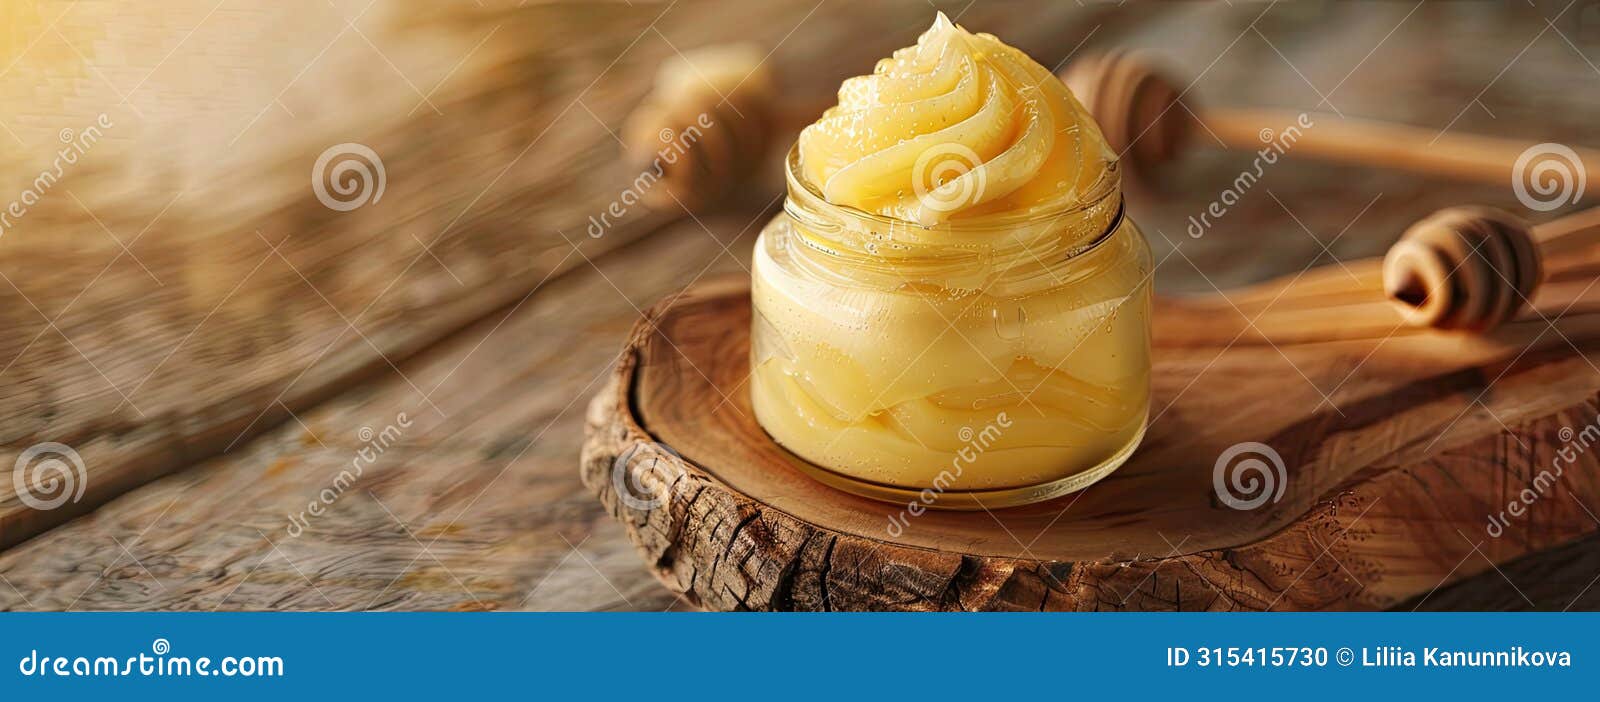 royal jelly produced by bees, emphasizing its natural richness and nutritional benefits.